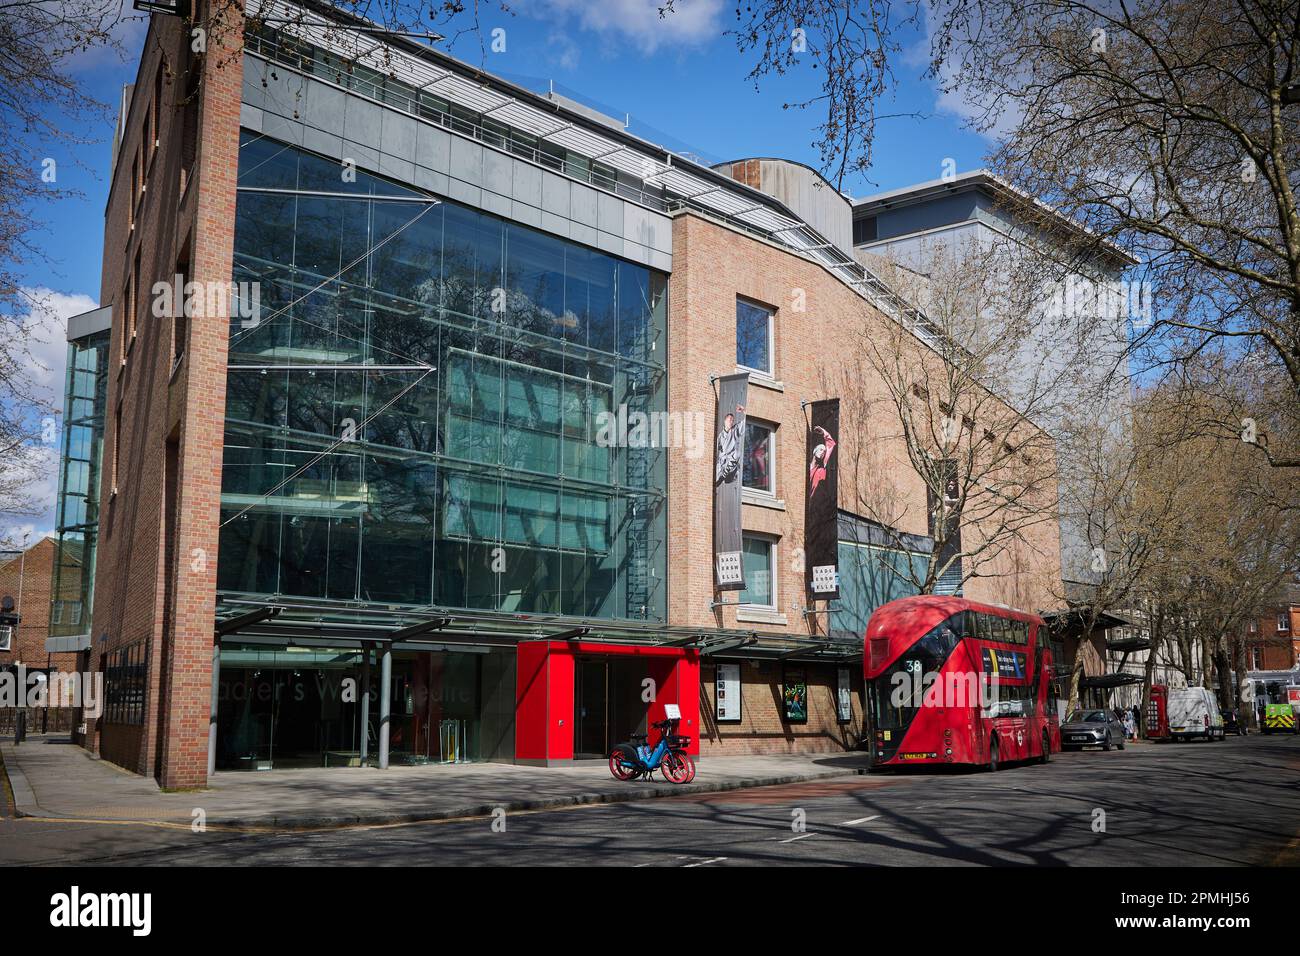 The Number 38 New Routemaster double-decker bus outside Sadler's Wells Theatre, Angel, Islington, London, England, United Kingdom. Stock Photo